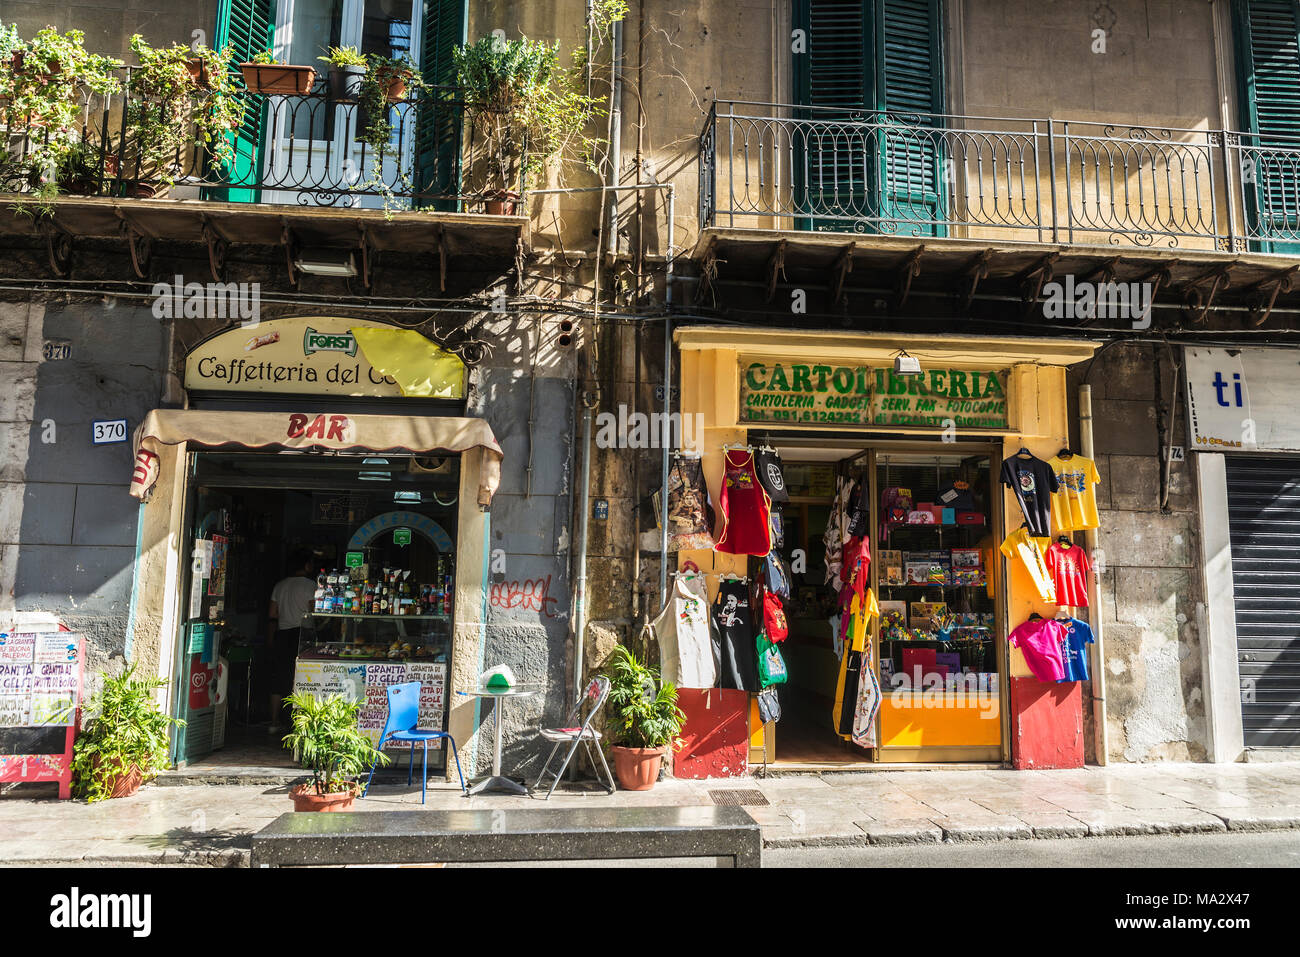 Palermo, Italy - August 10, 2017: Souvenir shop and snack bar in the old town of Palermo in Sicily, Italy Stock Photo